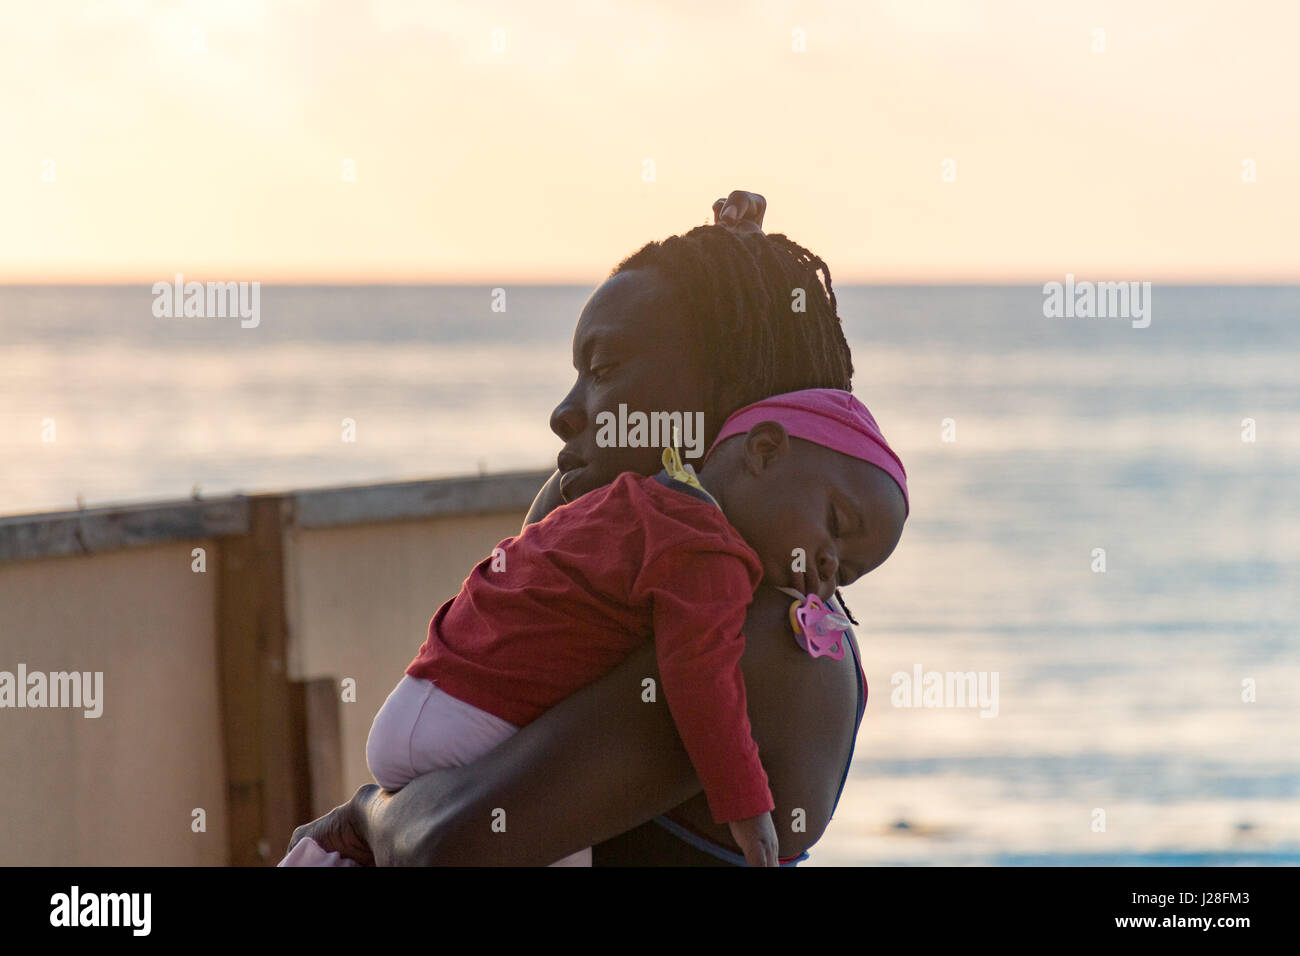 Jamaica, Negril, Bedtime, Mother is carrying her sleeping baby Stock Photo